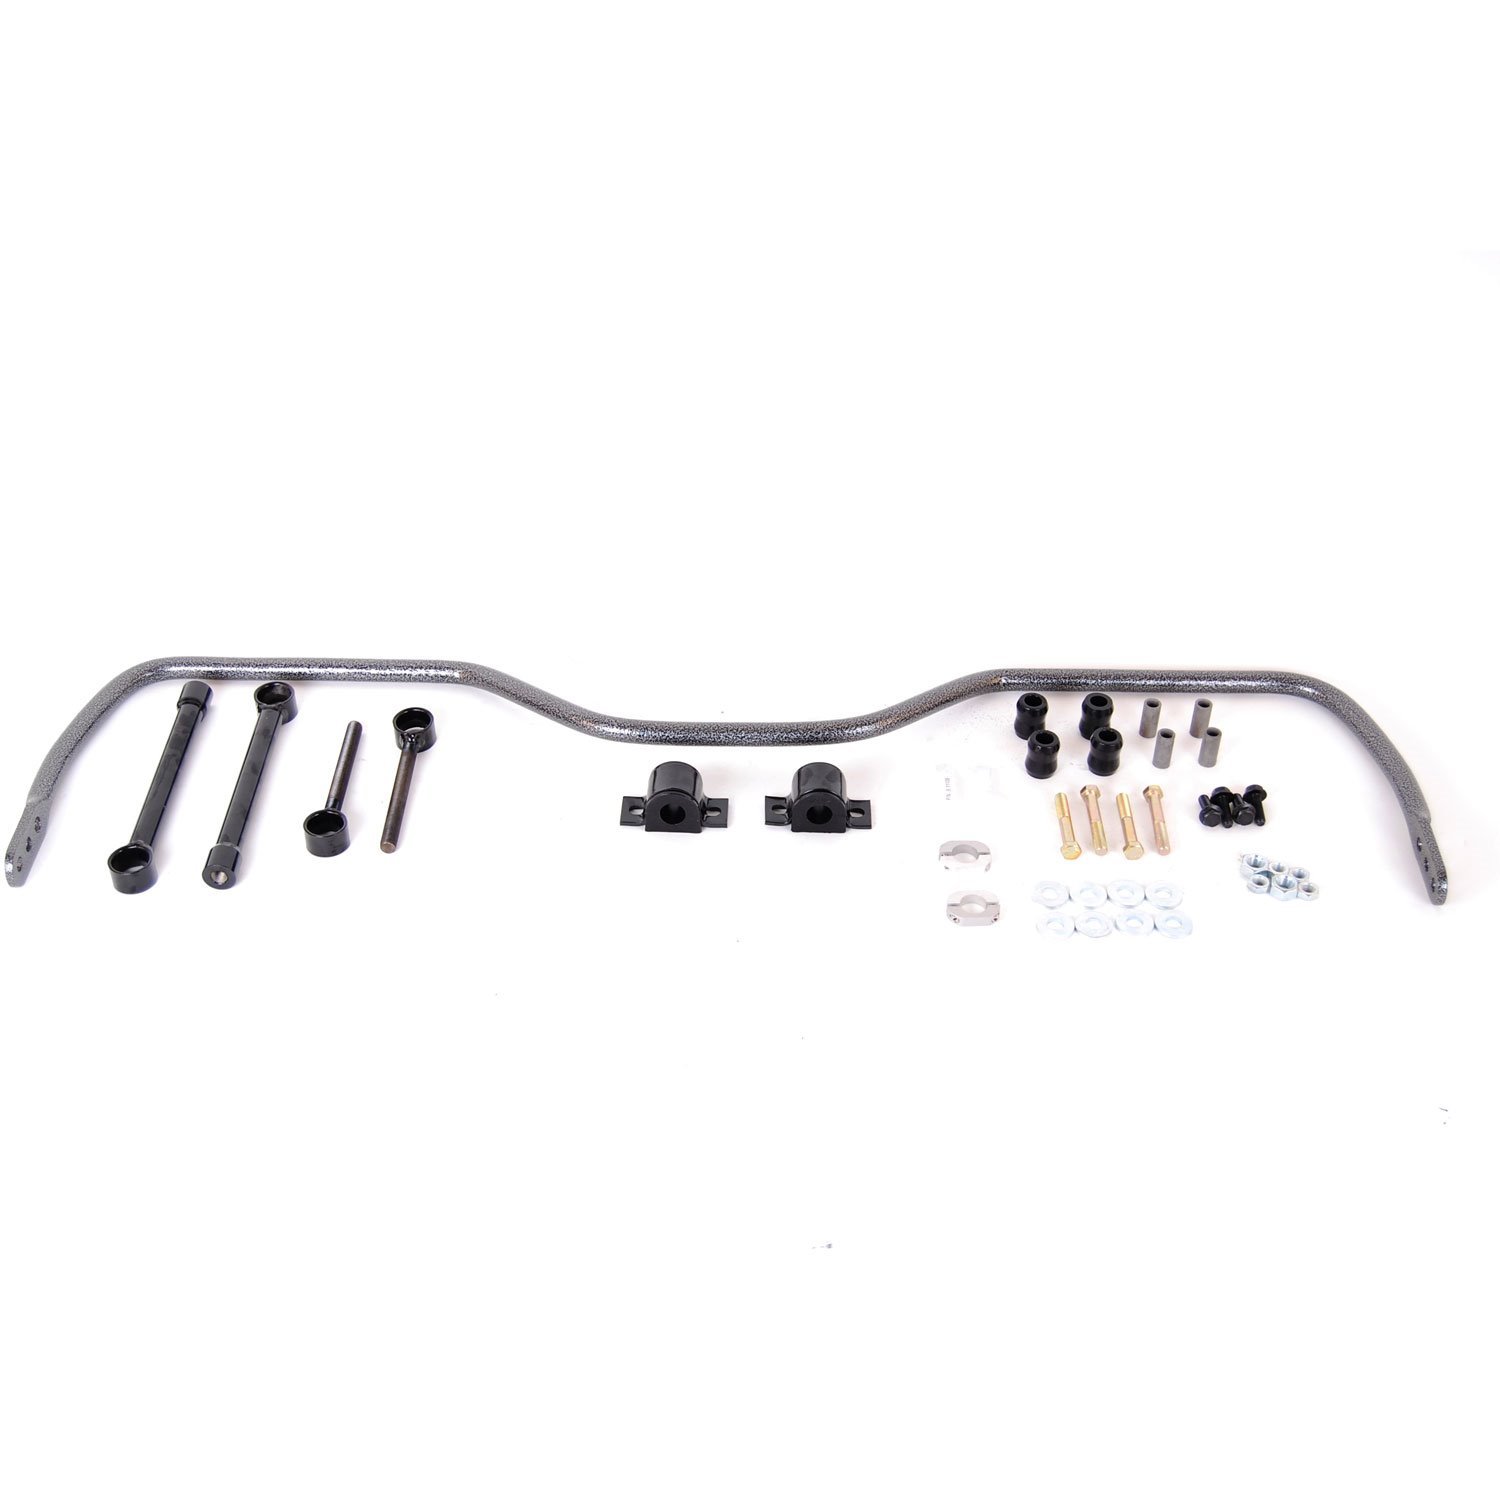 Rear Sway Bar for 2009-2016 Dodge Ram 1500 4WD